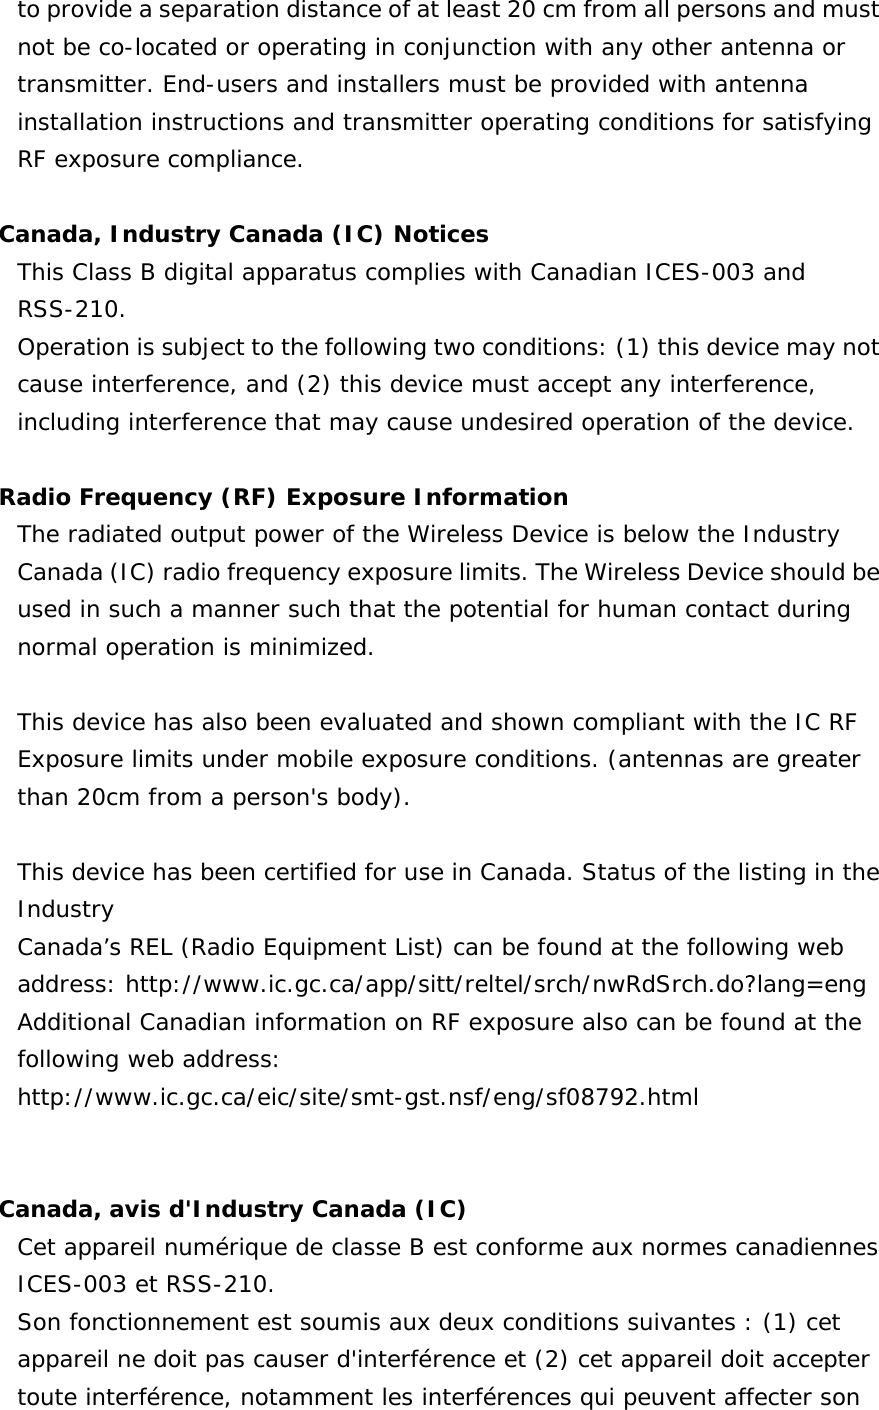   to provide a separation distance of at least 20 cm from all persons and must not be co-located or operating in conjunction with any other antenna or transmitter. End-users and installers must be provided with antenna installation instructions and transmitter operating conditions for satisfying RF exposure compliance.  Canada, Industry Canada (IC) Notices  This Class B digital apparatus complies with Canadian ICES-003 and RSS-210.  Operation is subject to the following two conditions: (1) this device may not cause interference, and (2) this device must accept any interference, including interference that may cause undesired operation of the device.  Radio Frequency (RF) Exposure Information  The radiated output power of the Wireless Device is below the Industry Canada (IC) radio frequency exposure limits. The Wireless Device should be used in such a manner such that the potential for human contact during normal operation is minimized.   This device has also been evaluated and shown compliant with the IC RF Exposure limits under mobile exposure conditions. (antennas are greater than 20cm from a person&apos;s body).  This device has been certified for use in Canada. Status of the listing in the Industry  Canada’s REL (Radio Equipment List) can be found at the following web address: http://www.ic.gc.ca/app/sitt/reltel/srch/nwRdSrch.do?lang=eng  Additional Canadian information on RF exposure also can be found at the following web address: http://www.ic.gc.ca/eic/site/smt-gst.nsf/eng/sf08792.html   Canada, avis d&apos;Industry Canada (IC)  Cet appareil numérique de classe B est conforme aux normes canadiennes ICES-003 et RSS-210.  Son fonctionnement est soumis aux deux conditions suivantes : (1) cet appareil ne doit pas causer d&apos;interférence et (2) cet appareil doit accepter toute interférence, notamment les interférences qui peuvent affecter son 